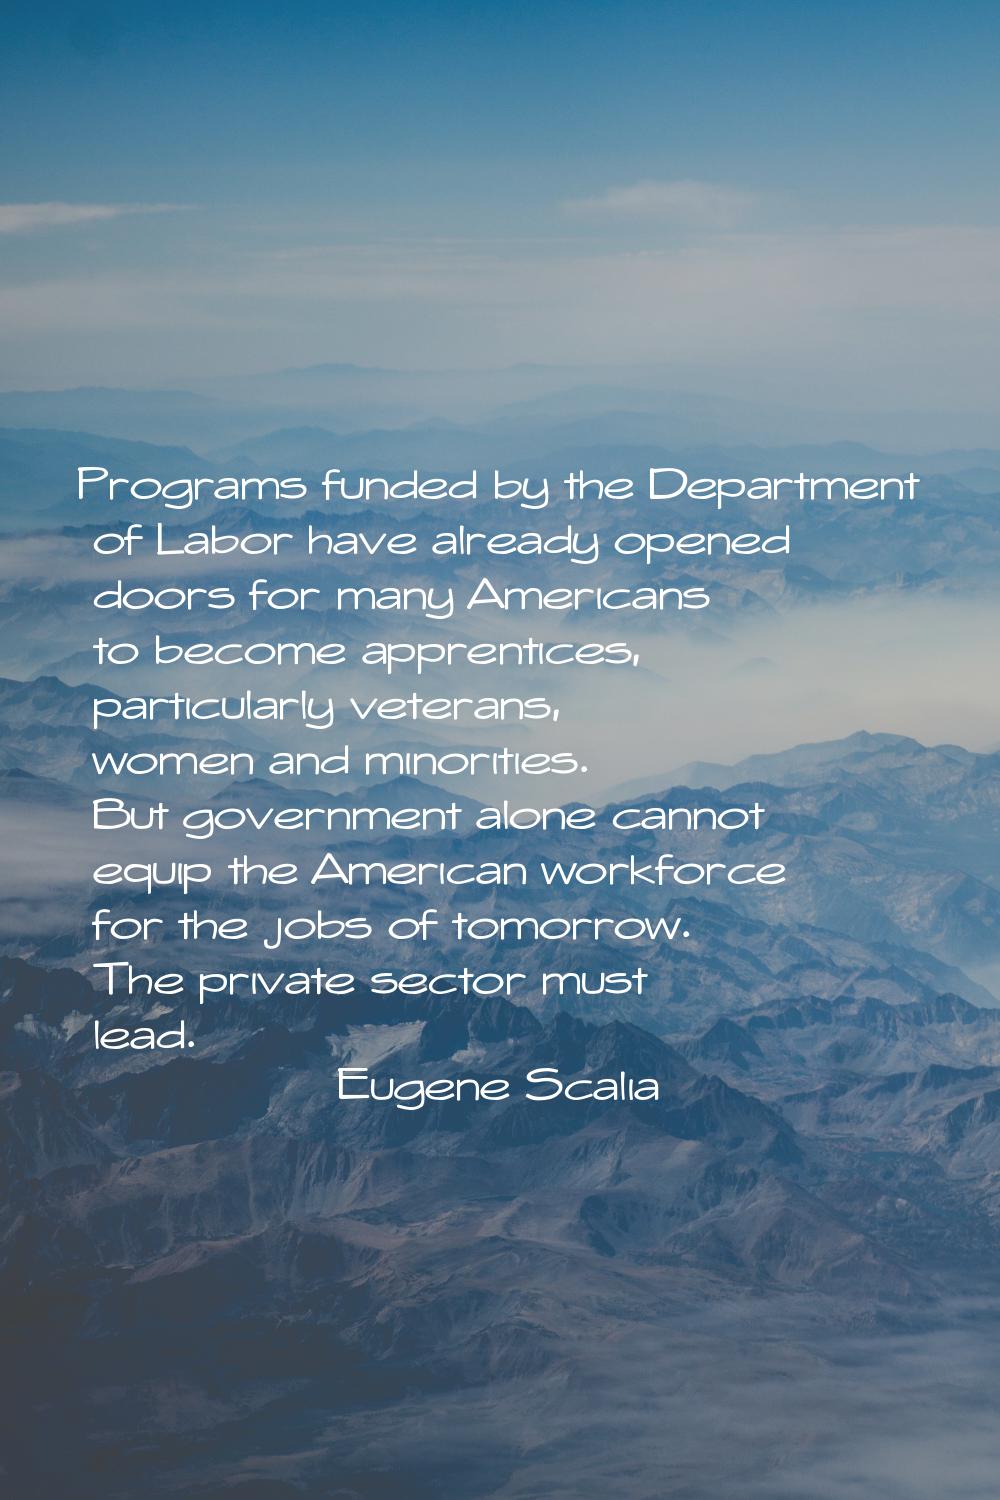 Programs funded by the Department of Labor have already opened doors for many Americans to become a